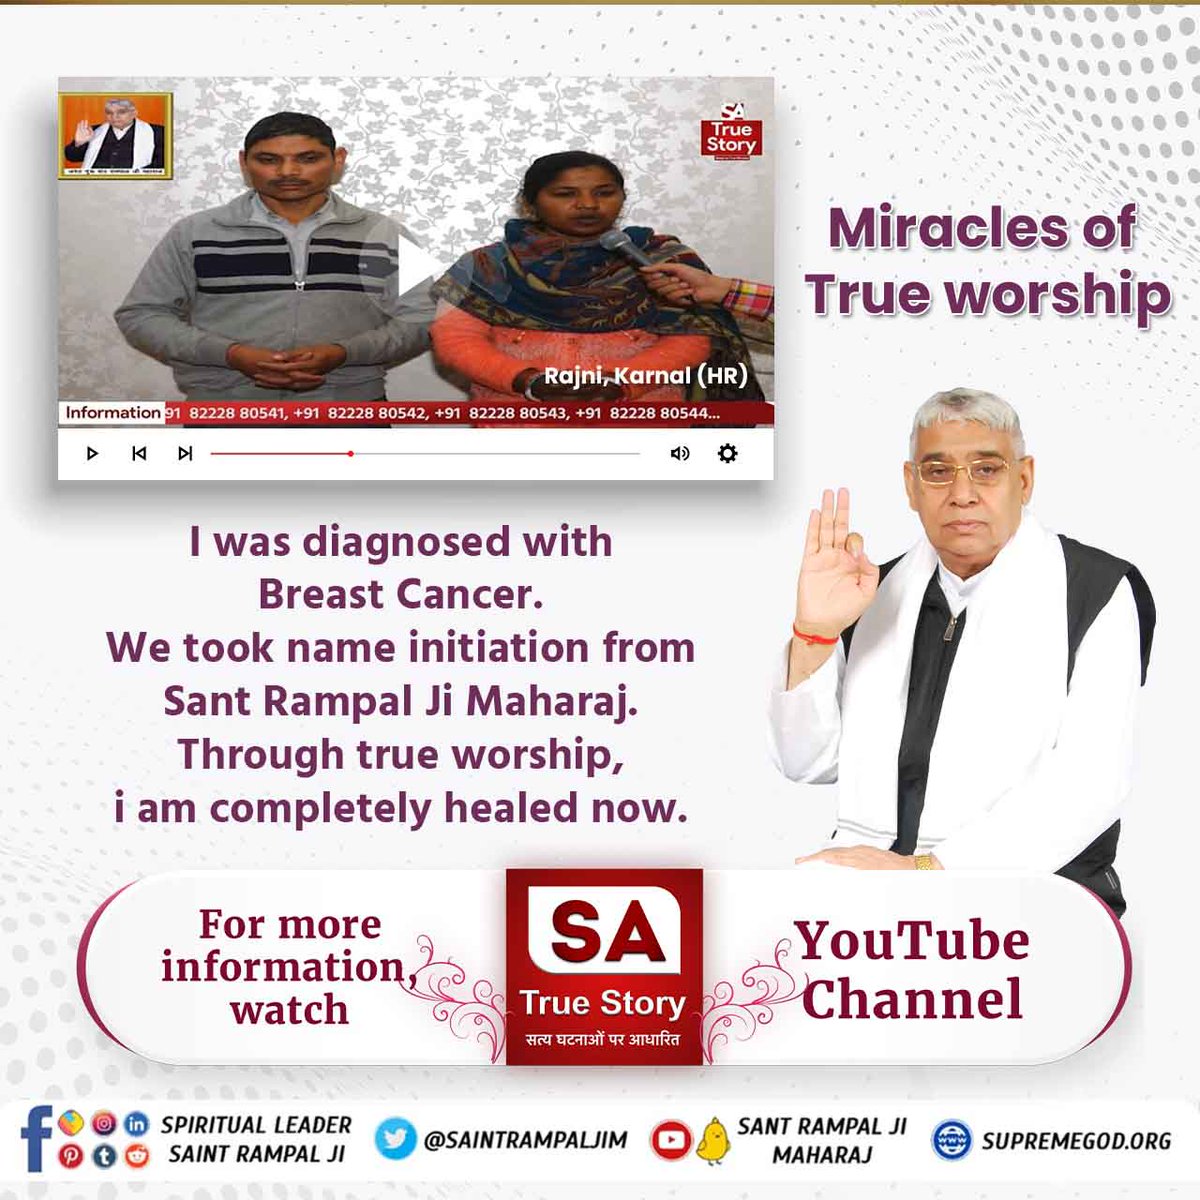 #ऐसे_सुख_देता_है_भगवान
Miracles of True Worship 
Name:- Rajni, karnal haryana 
I was diagnosed with breast cancer. 
We took name initiation from sant rampal ji maharaj. Through true worship, I am completely healed now.
Kabir Is God